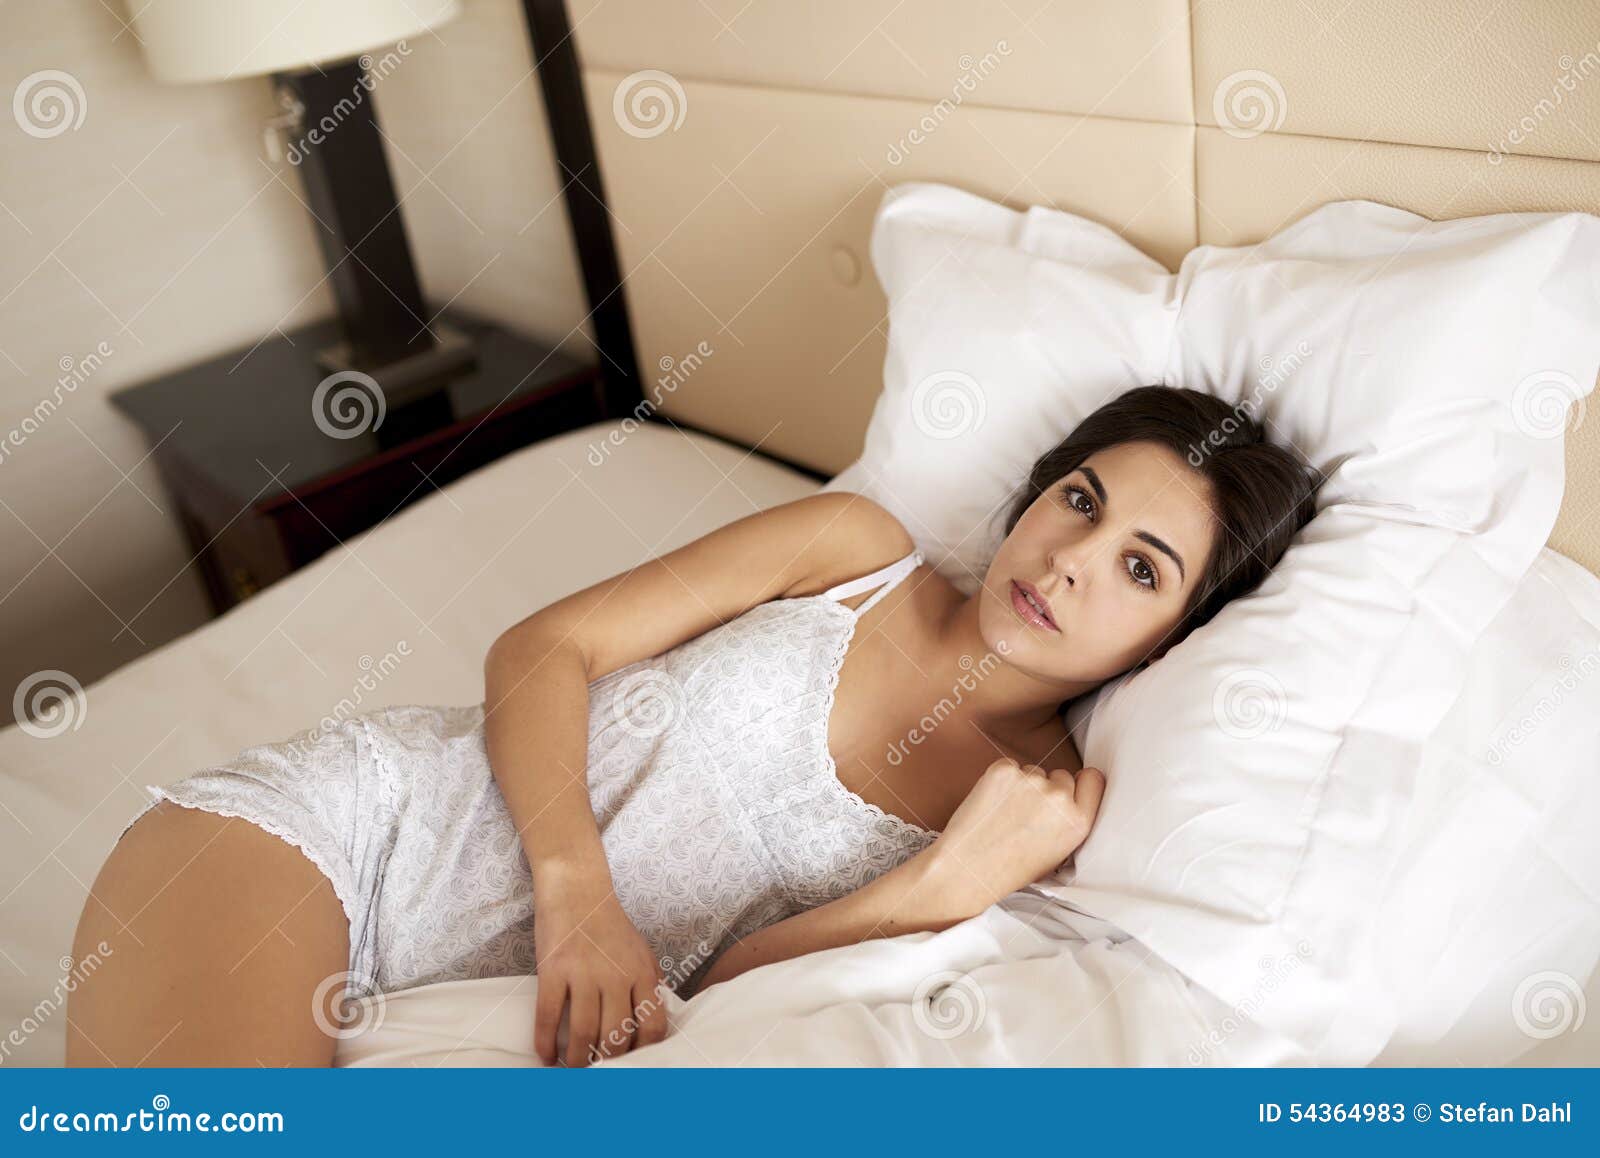 Woman Lying In Bed Resting Her Head On Pillow Stock Image Image Of